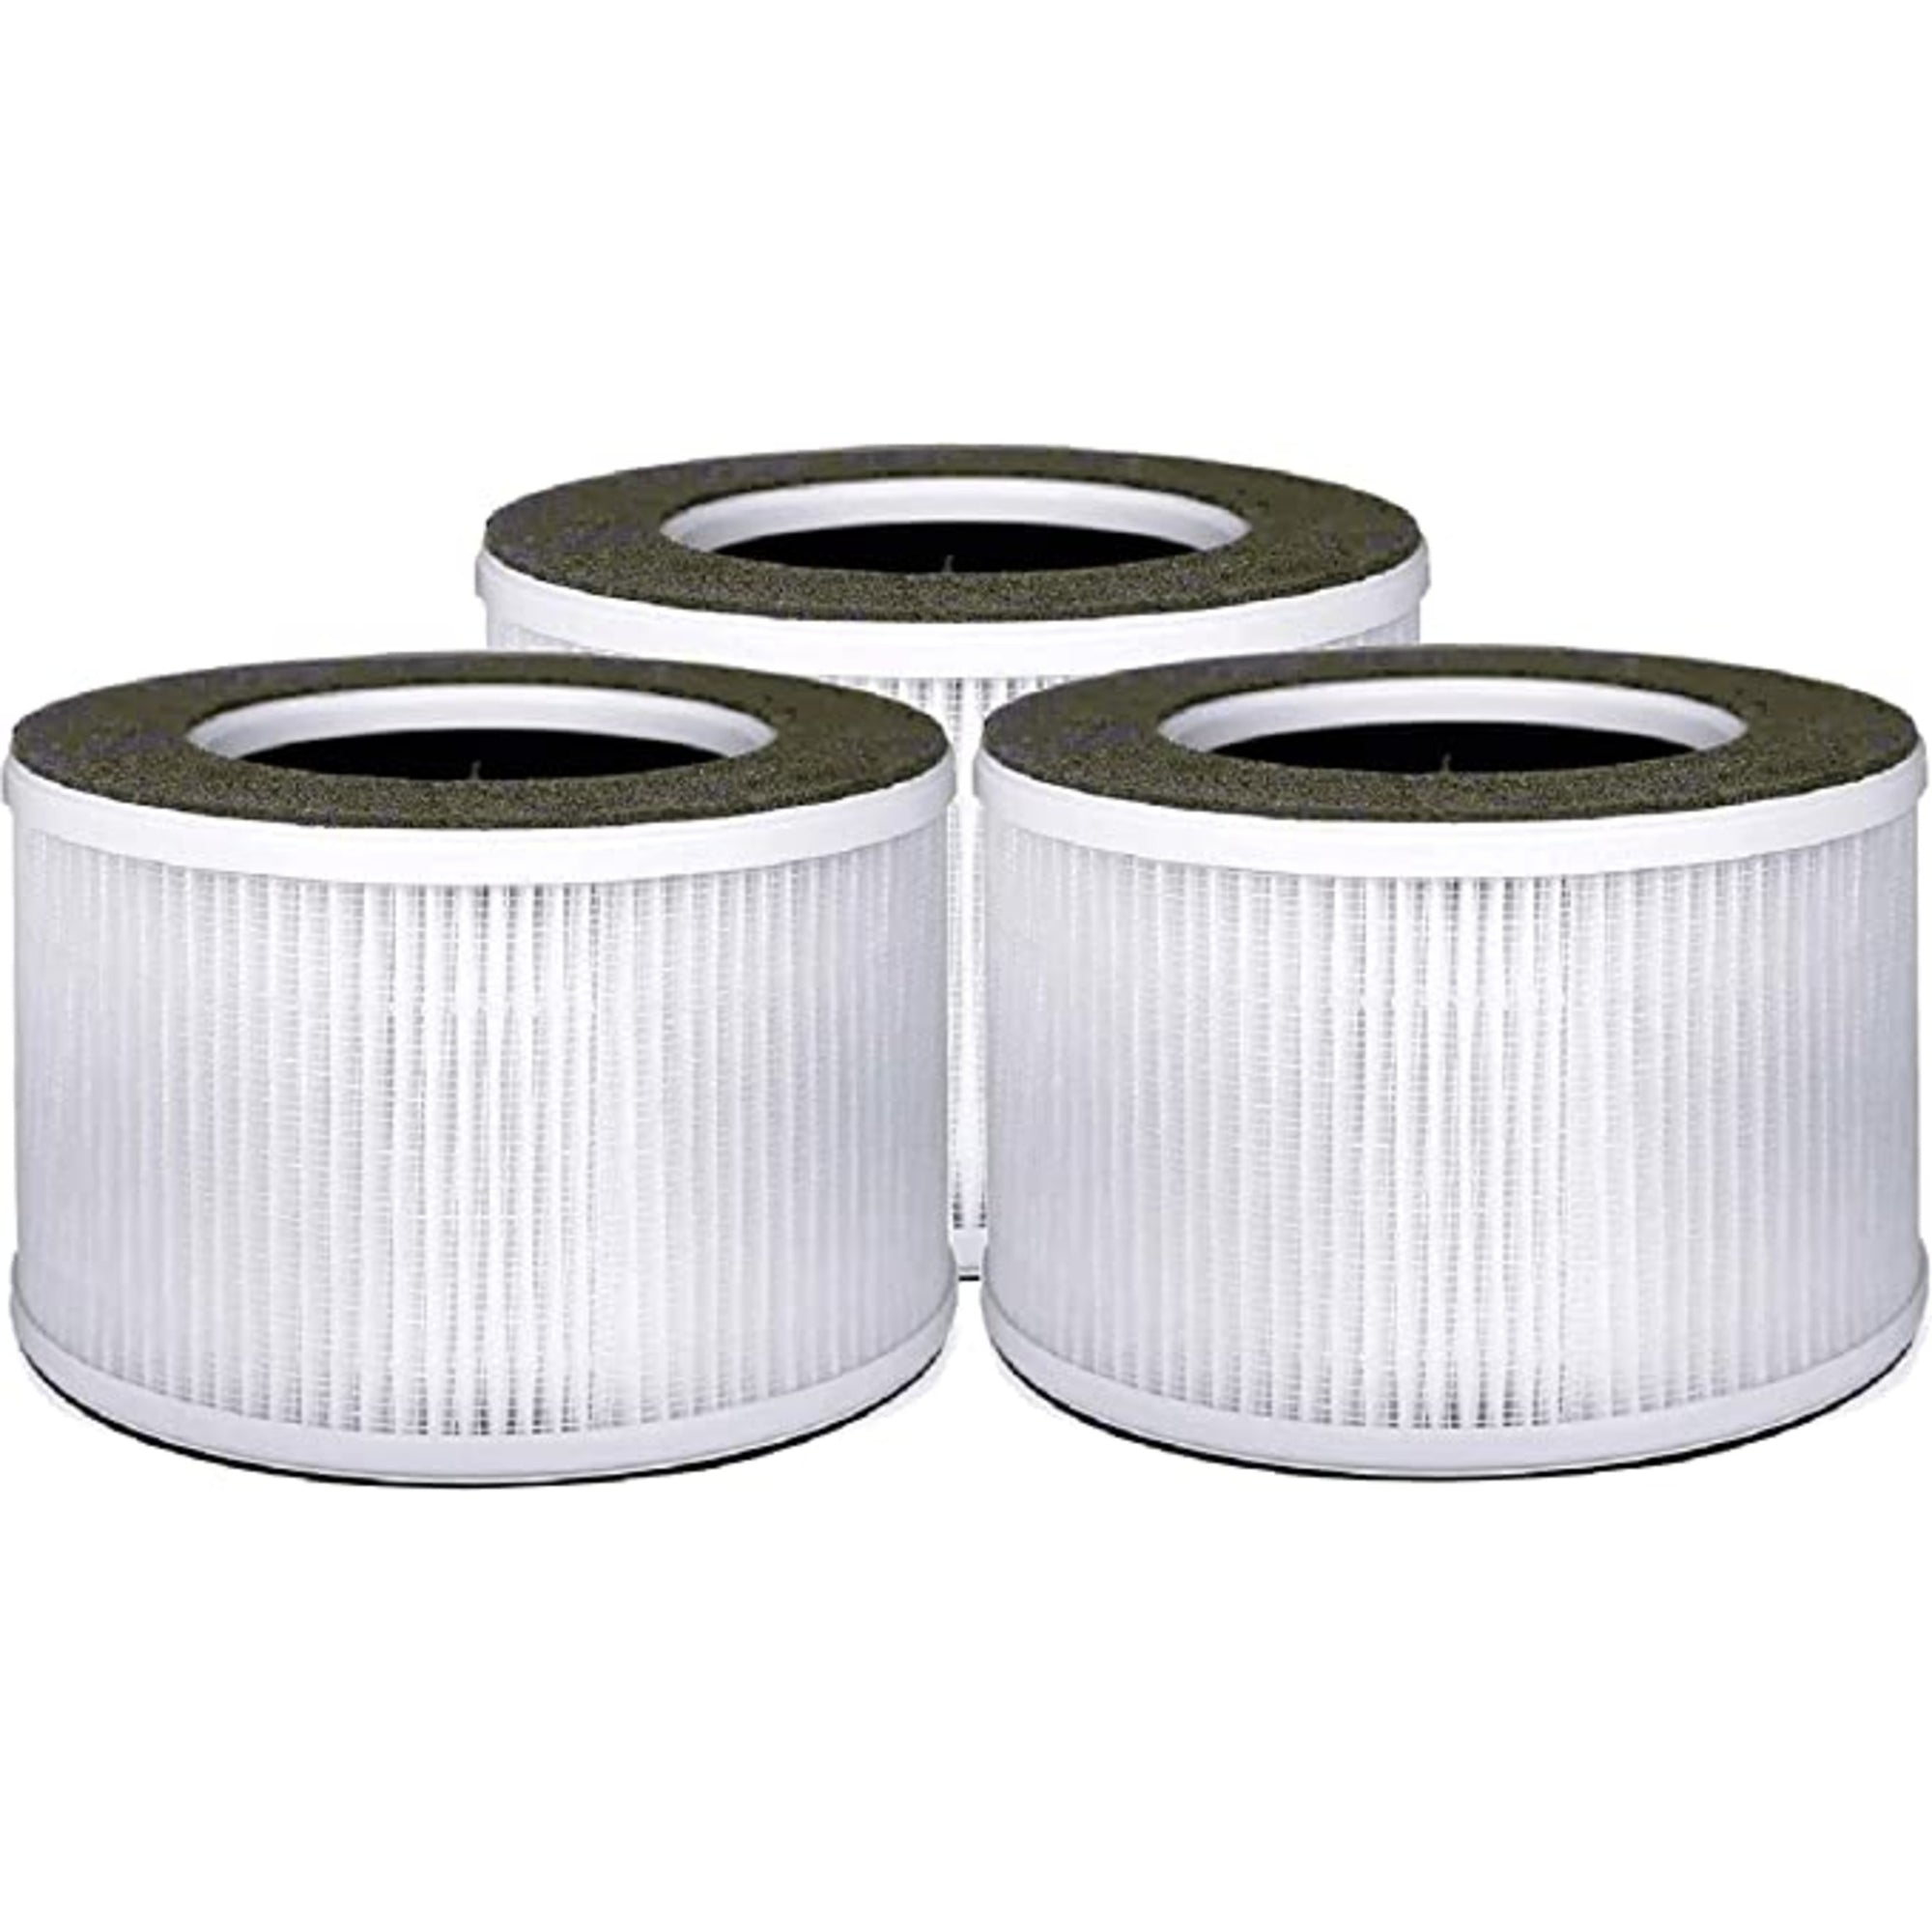 Nispira True HEPA Activated Carbon Pre Filter Replacement Compatible with Levoit Lv-h126 Air Purifier. Compared to Part Lv-h126-rf, 1 Pack